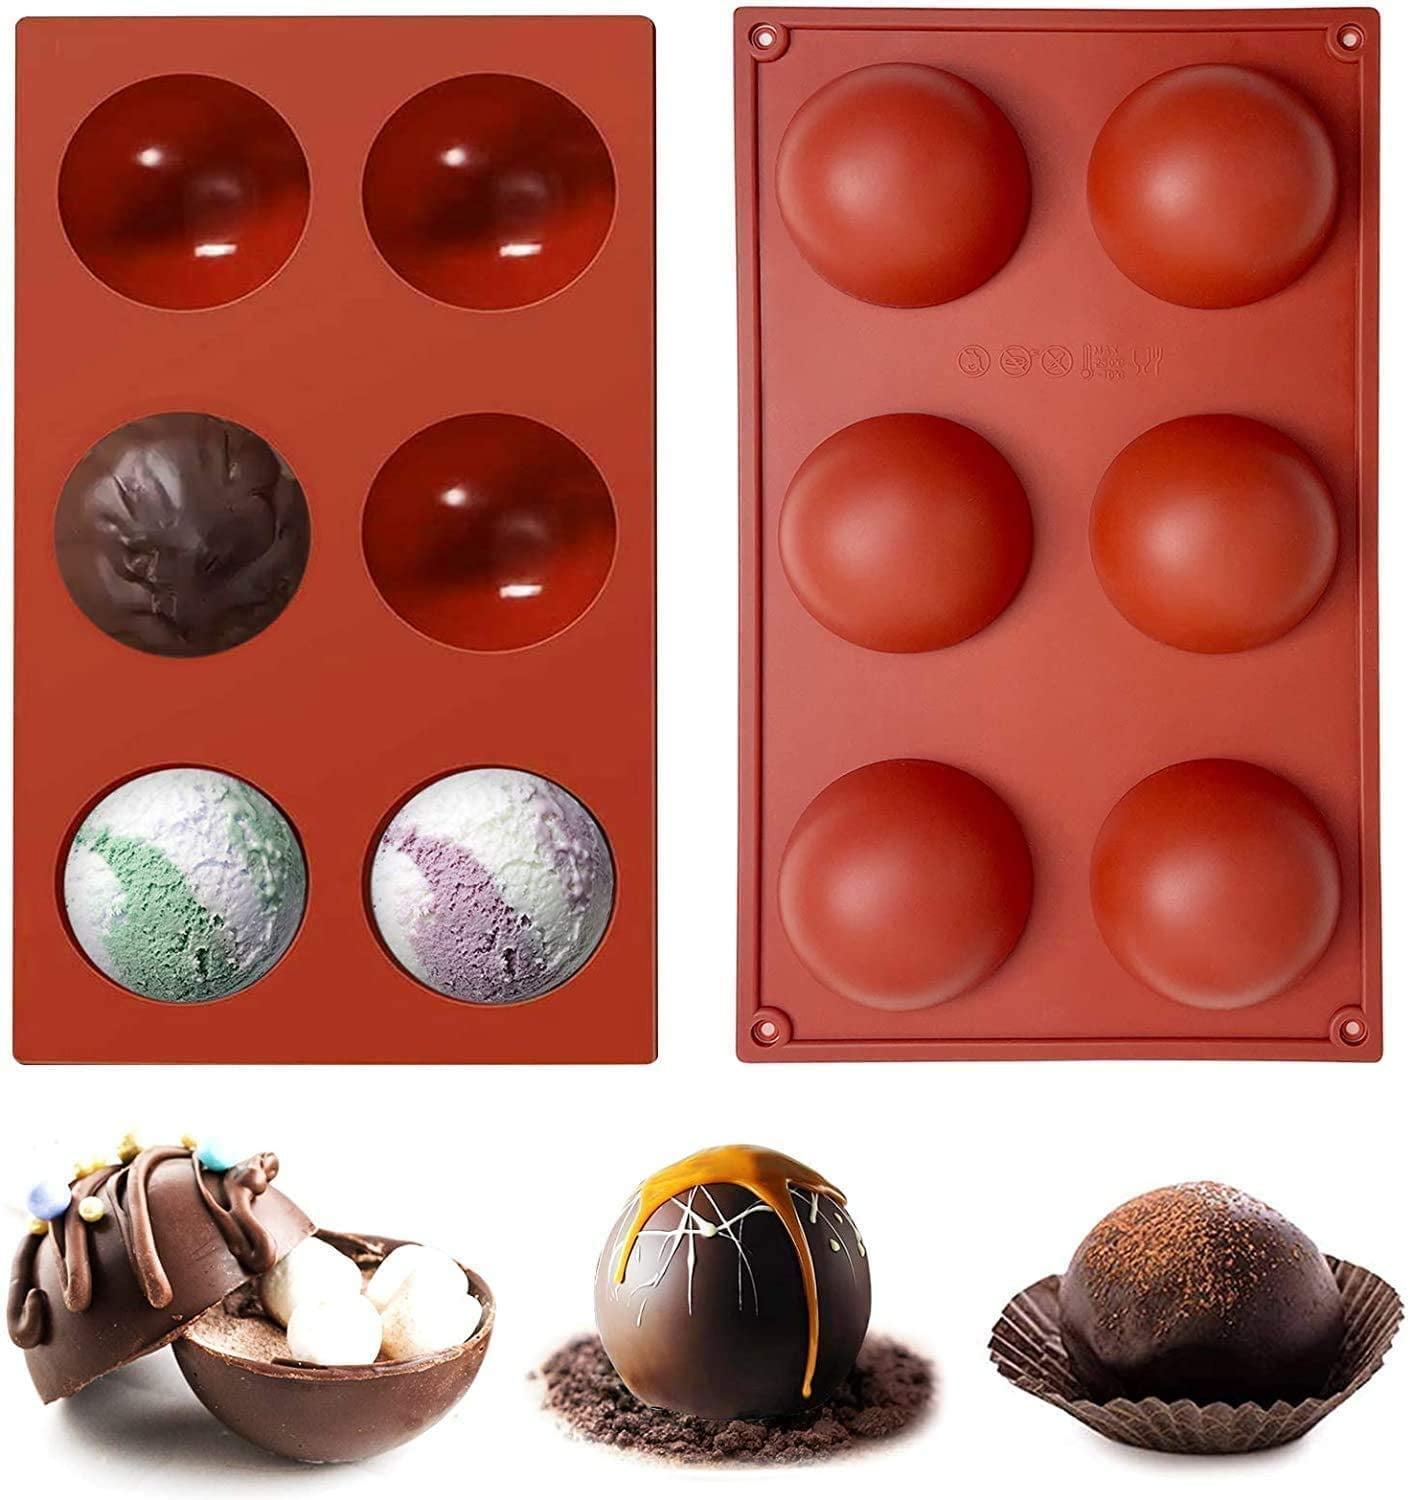 12 Cavity Silicone Cake Mold Hot Chocolate Bombs Mould 2" Cupcakes Baking Pan for sale online 